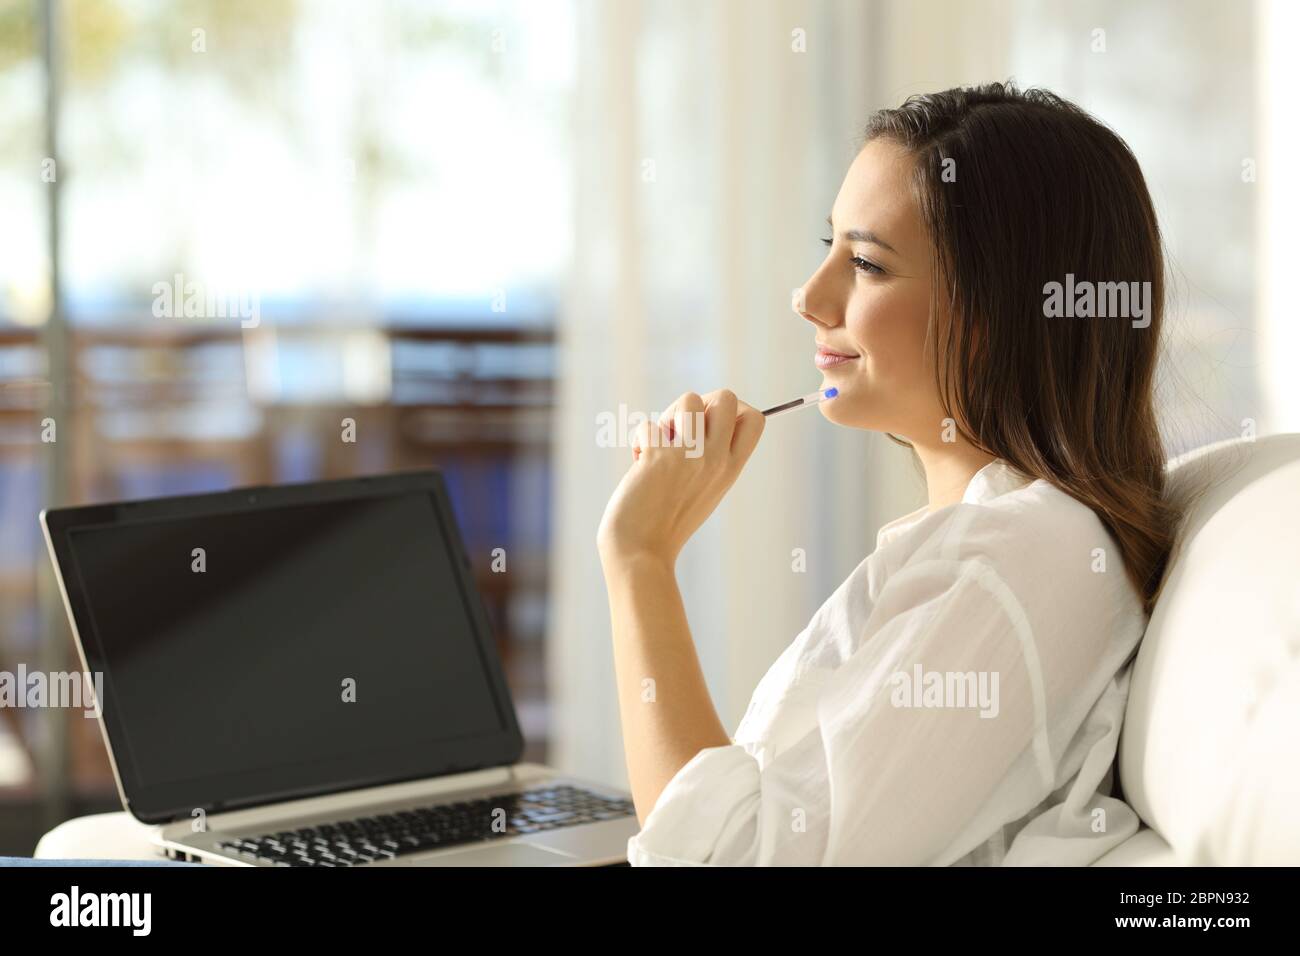 Side view portrait of a woman thinking looking at side and showing a blank laptop screen sitting on a couch of an apartment Stock Photo